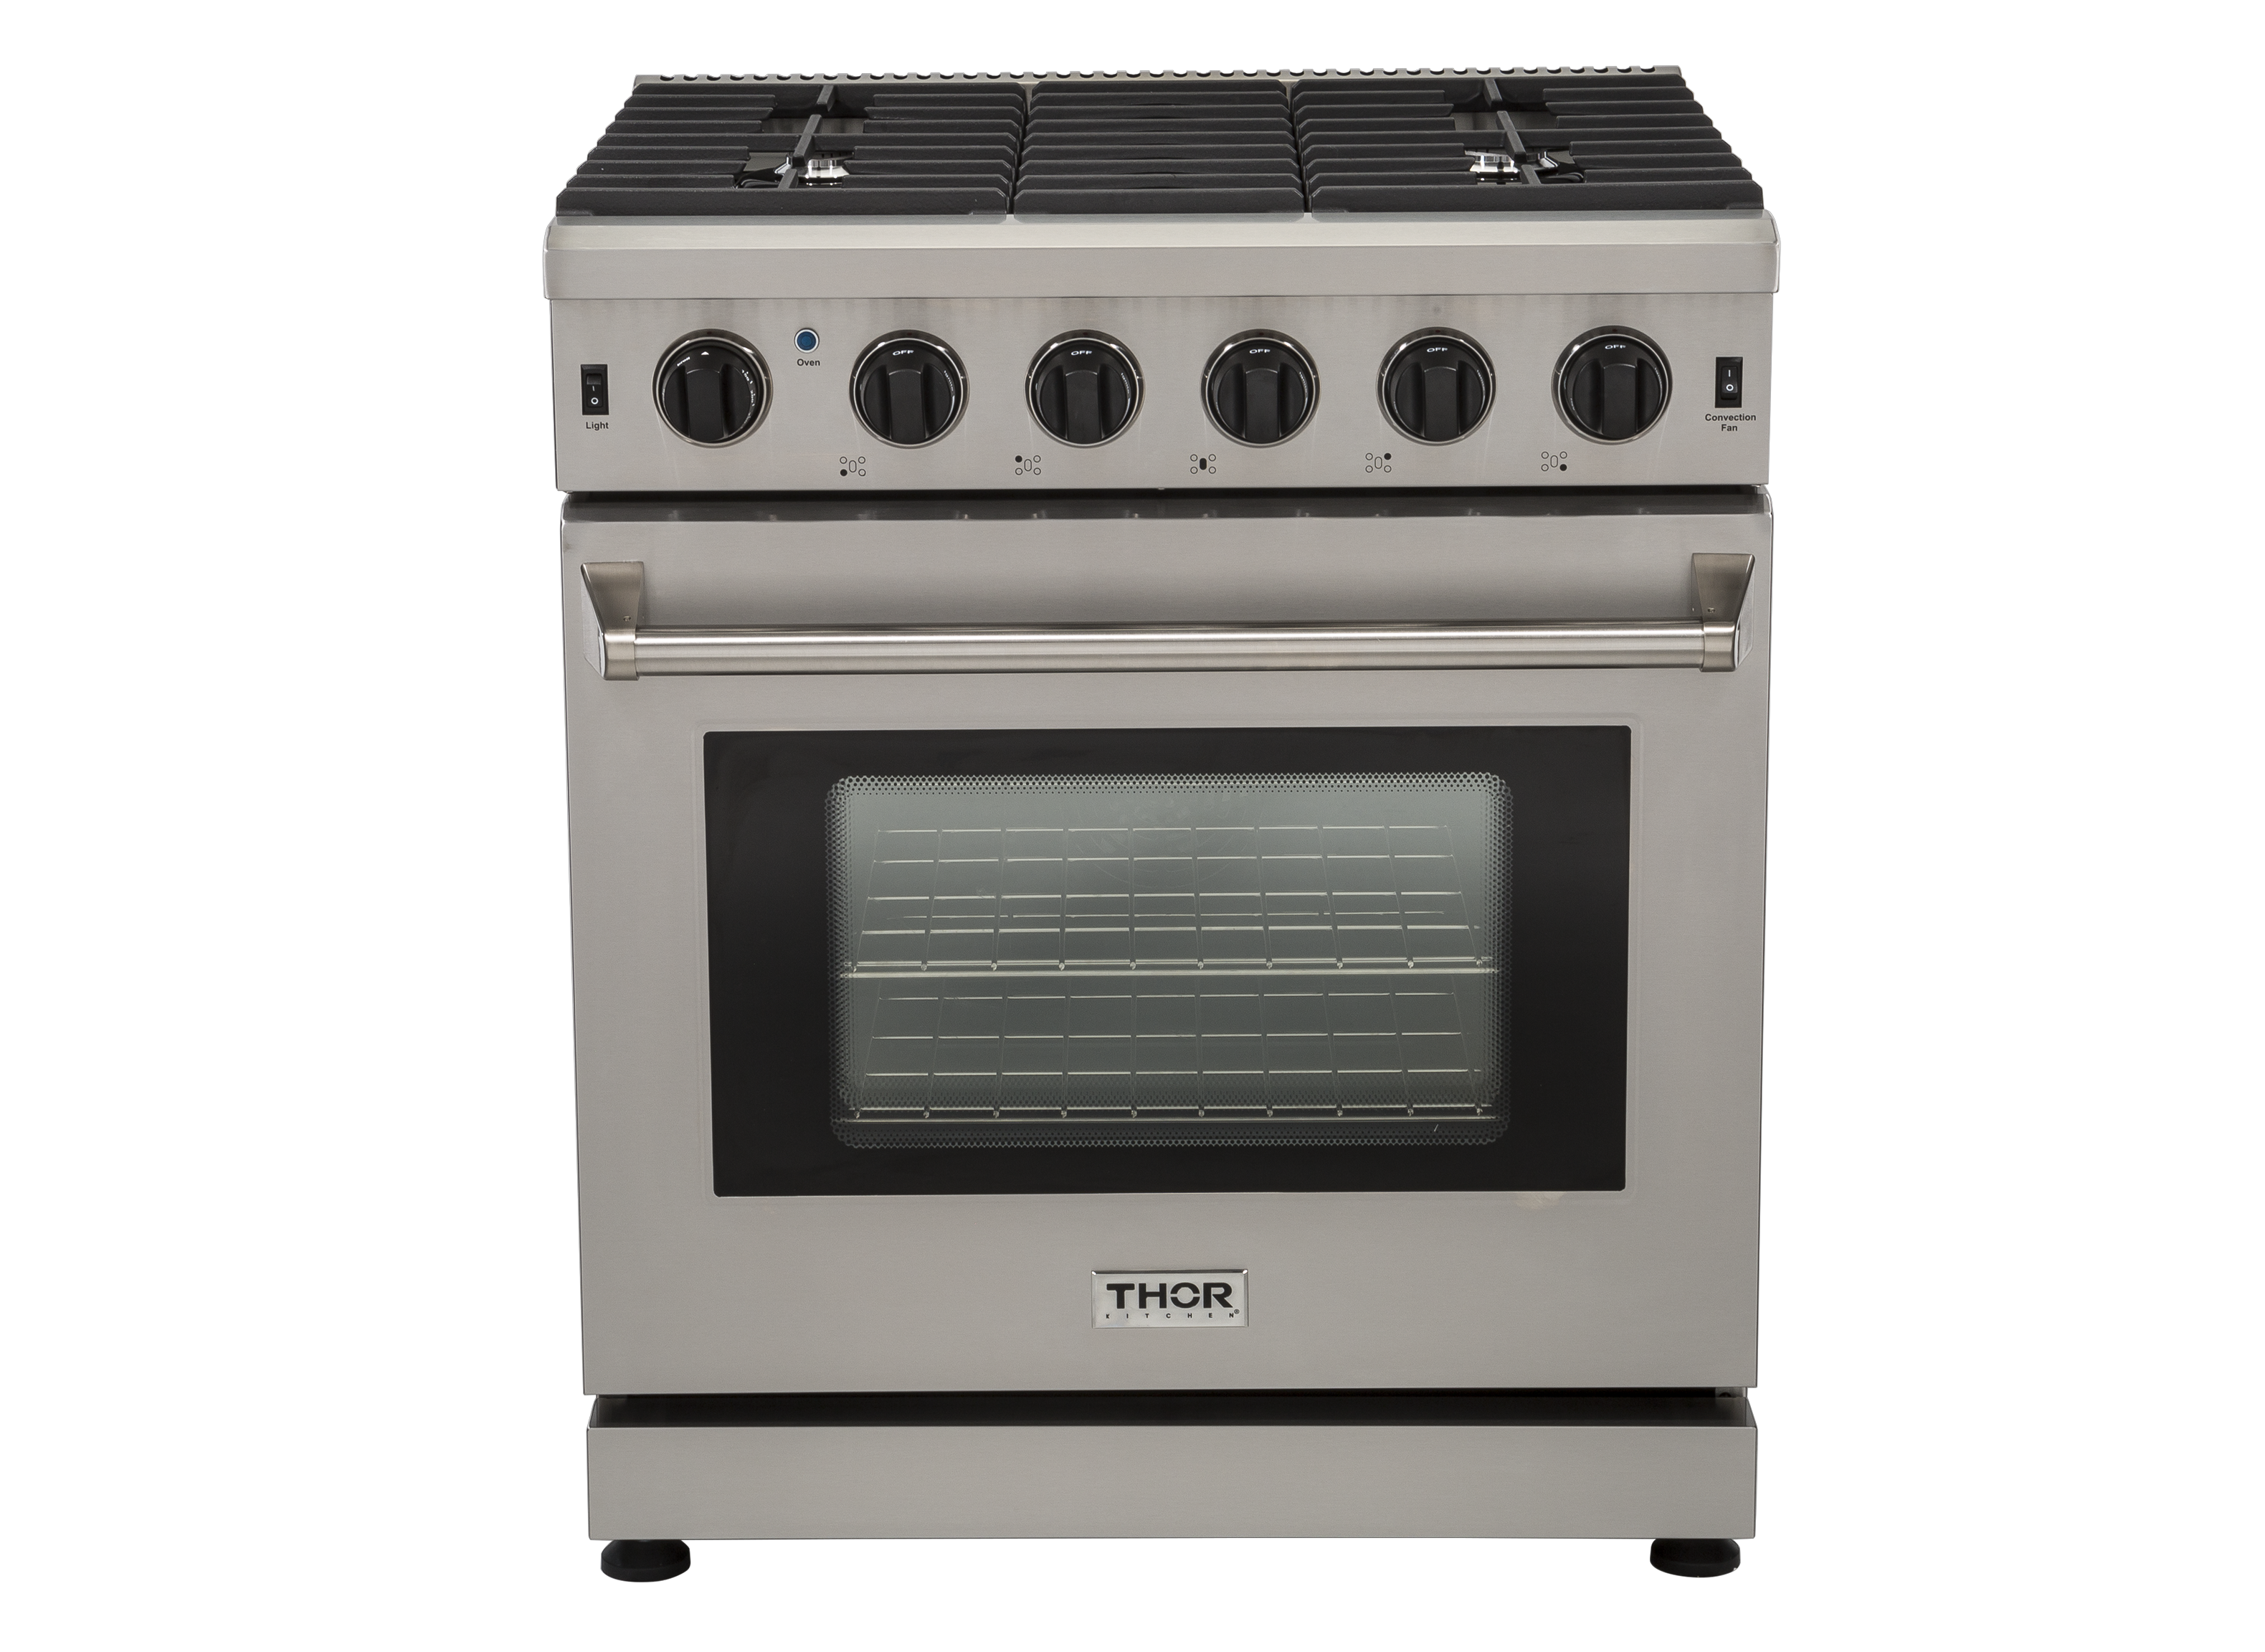 https://crdms.images.consumerreports.org/prod/products/cr/models/398330-gas-and-dual-fuel-single-oven-30-inch-thor-kitchen-lrg3001u-10005455.png